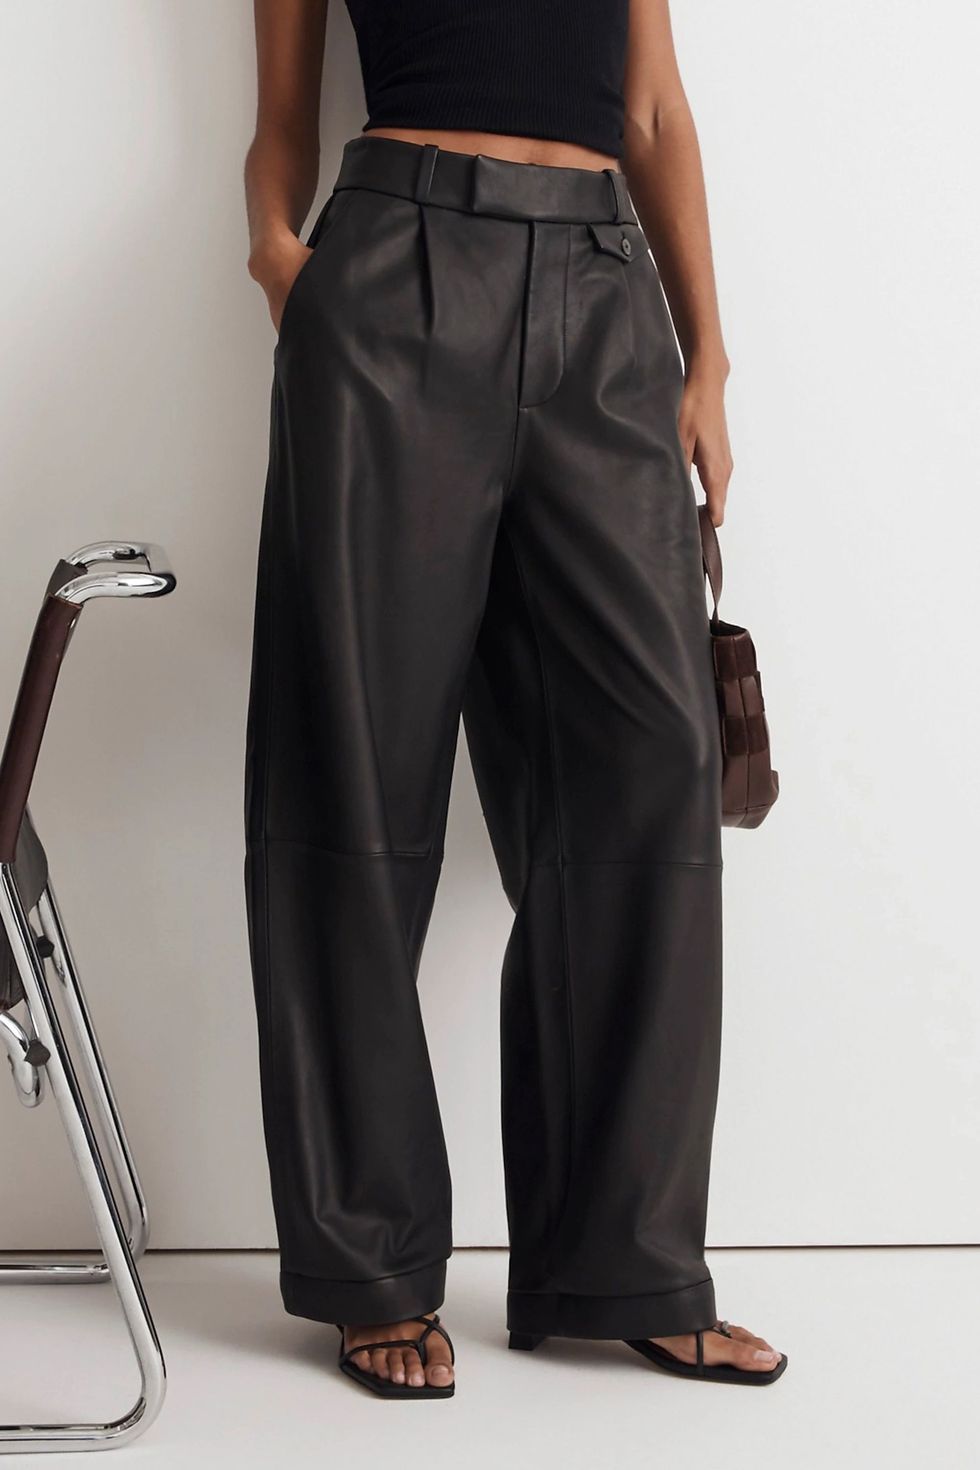 Only Black Petite High Waisted Faux Leather Workwear Trousers